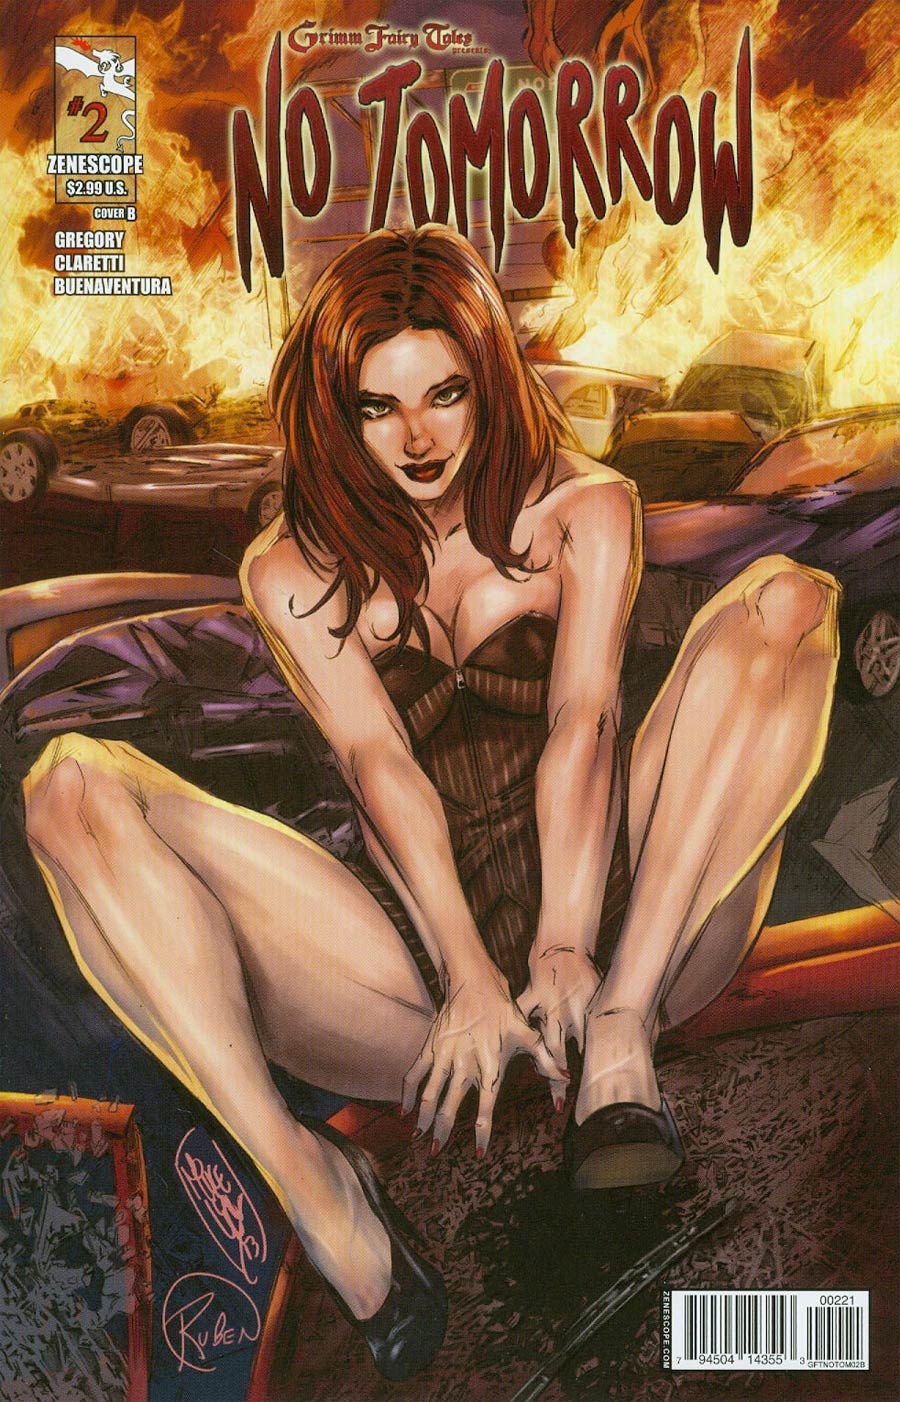 Grimm Fairy Tales Presents No Tomorrow #2 Cover B Mike Lilly